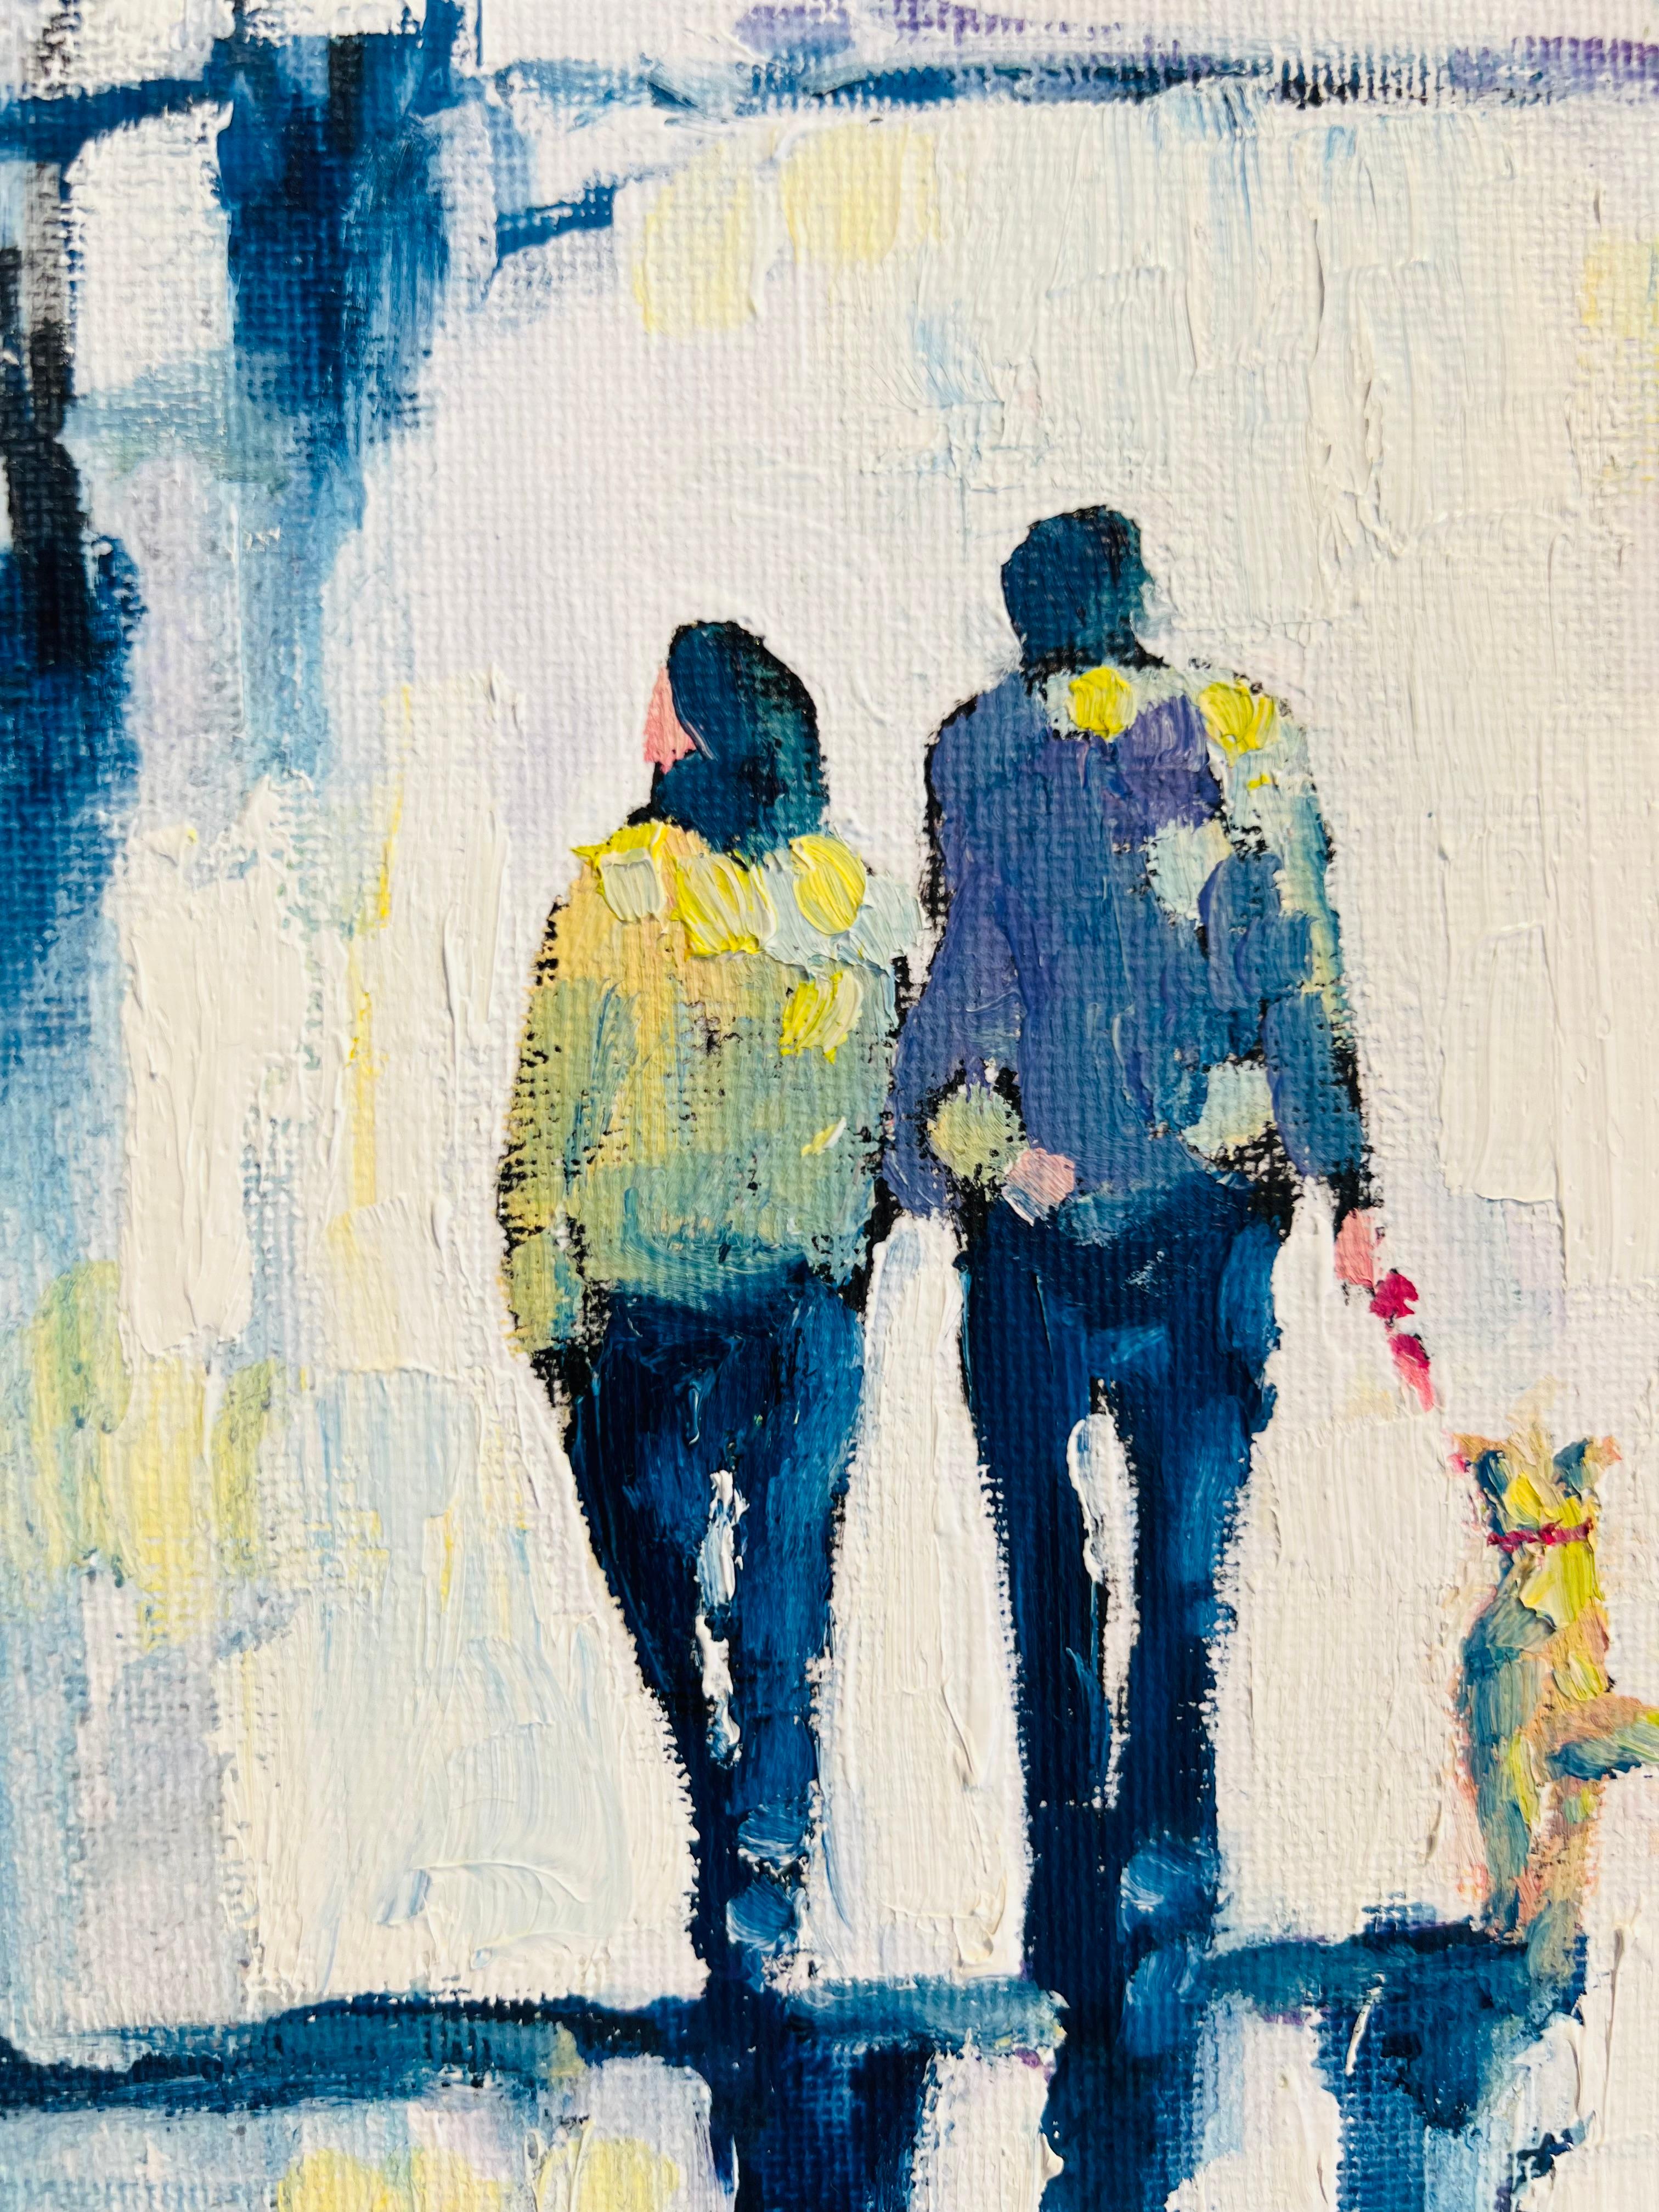 In this contemporary impressionist creation by artist Richard Gower, we find two individuals strolling their canine companion within an abstracted realm. The entire scene unfolds with bold impasto brushwork, imbuing the artwork with a dreamy and